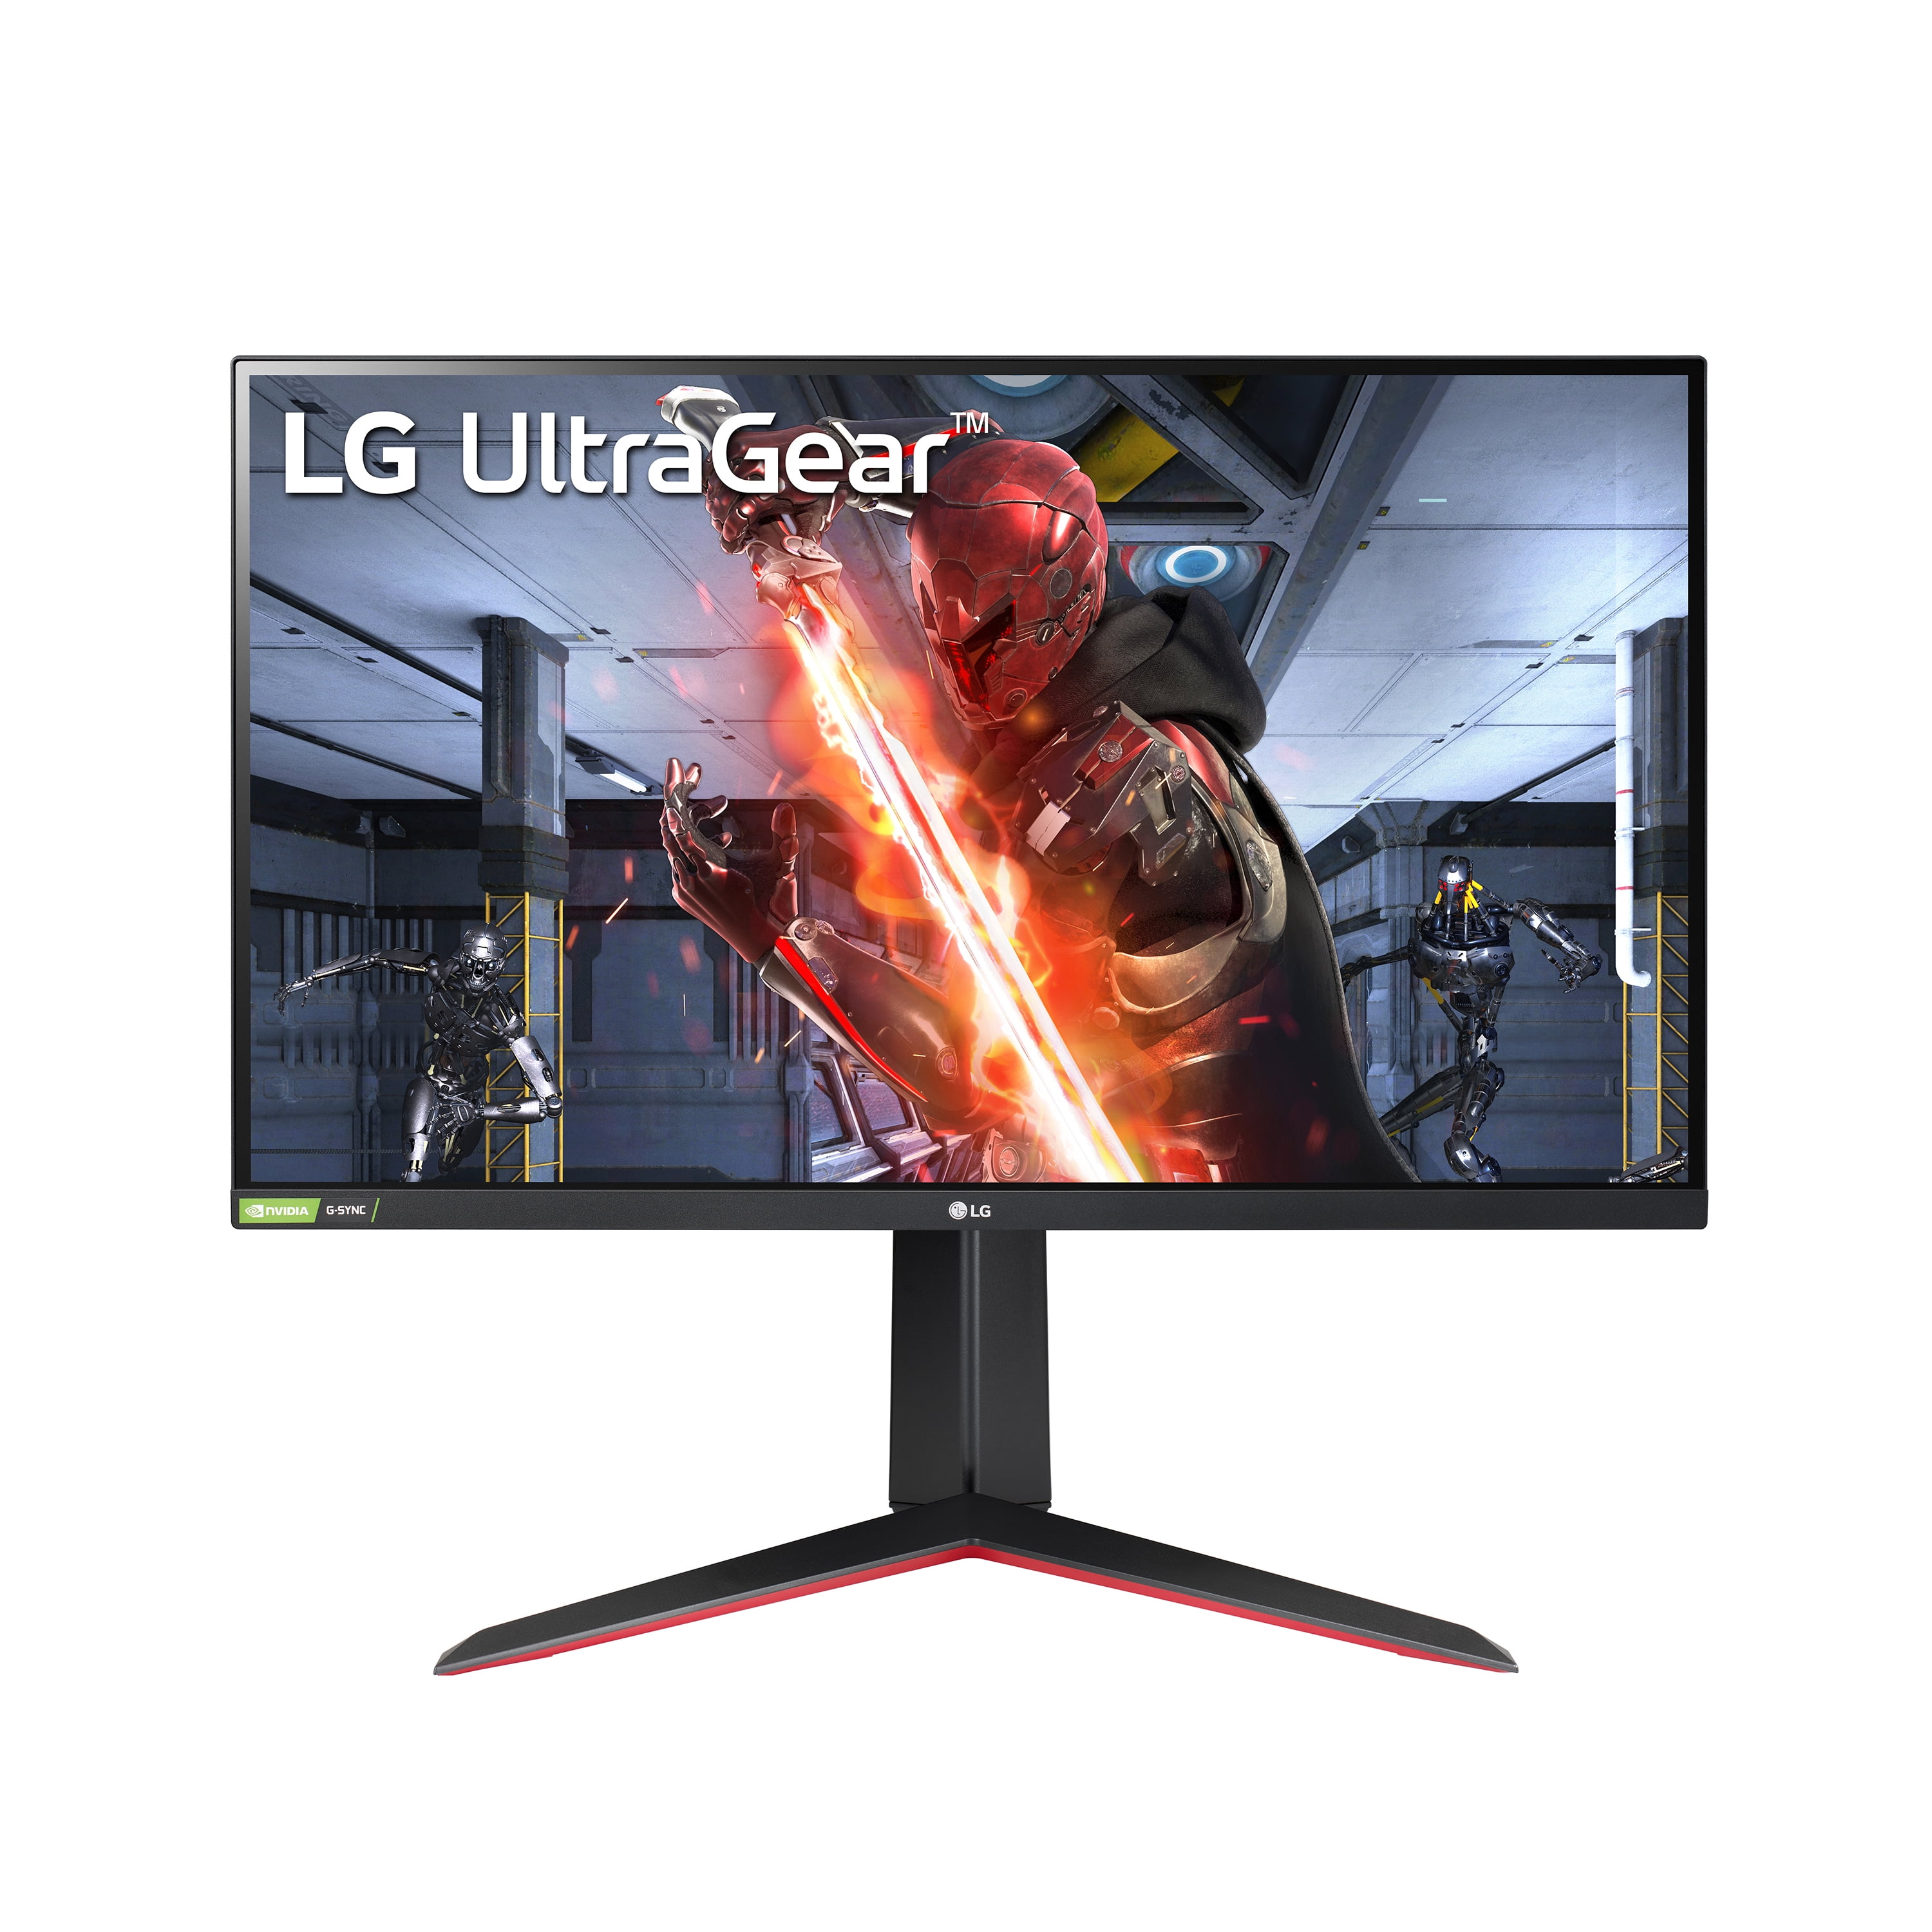 Lg 27 Class Ultragear Fhd Ips 1ms 144hz Hdr Monitor With G Sync Compatibility 27gn650 B Walmart Com